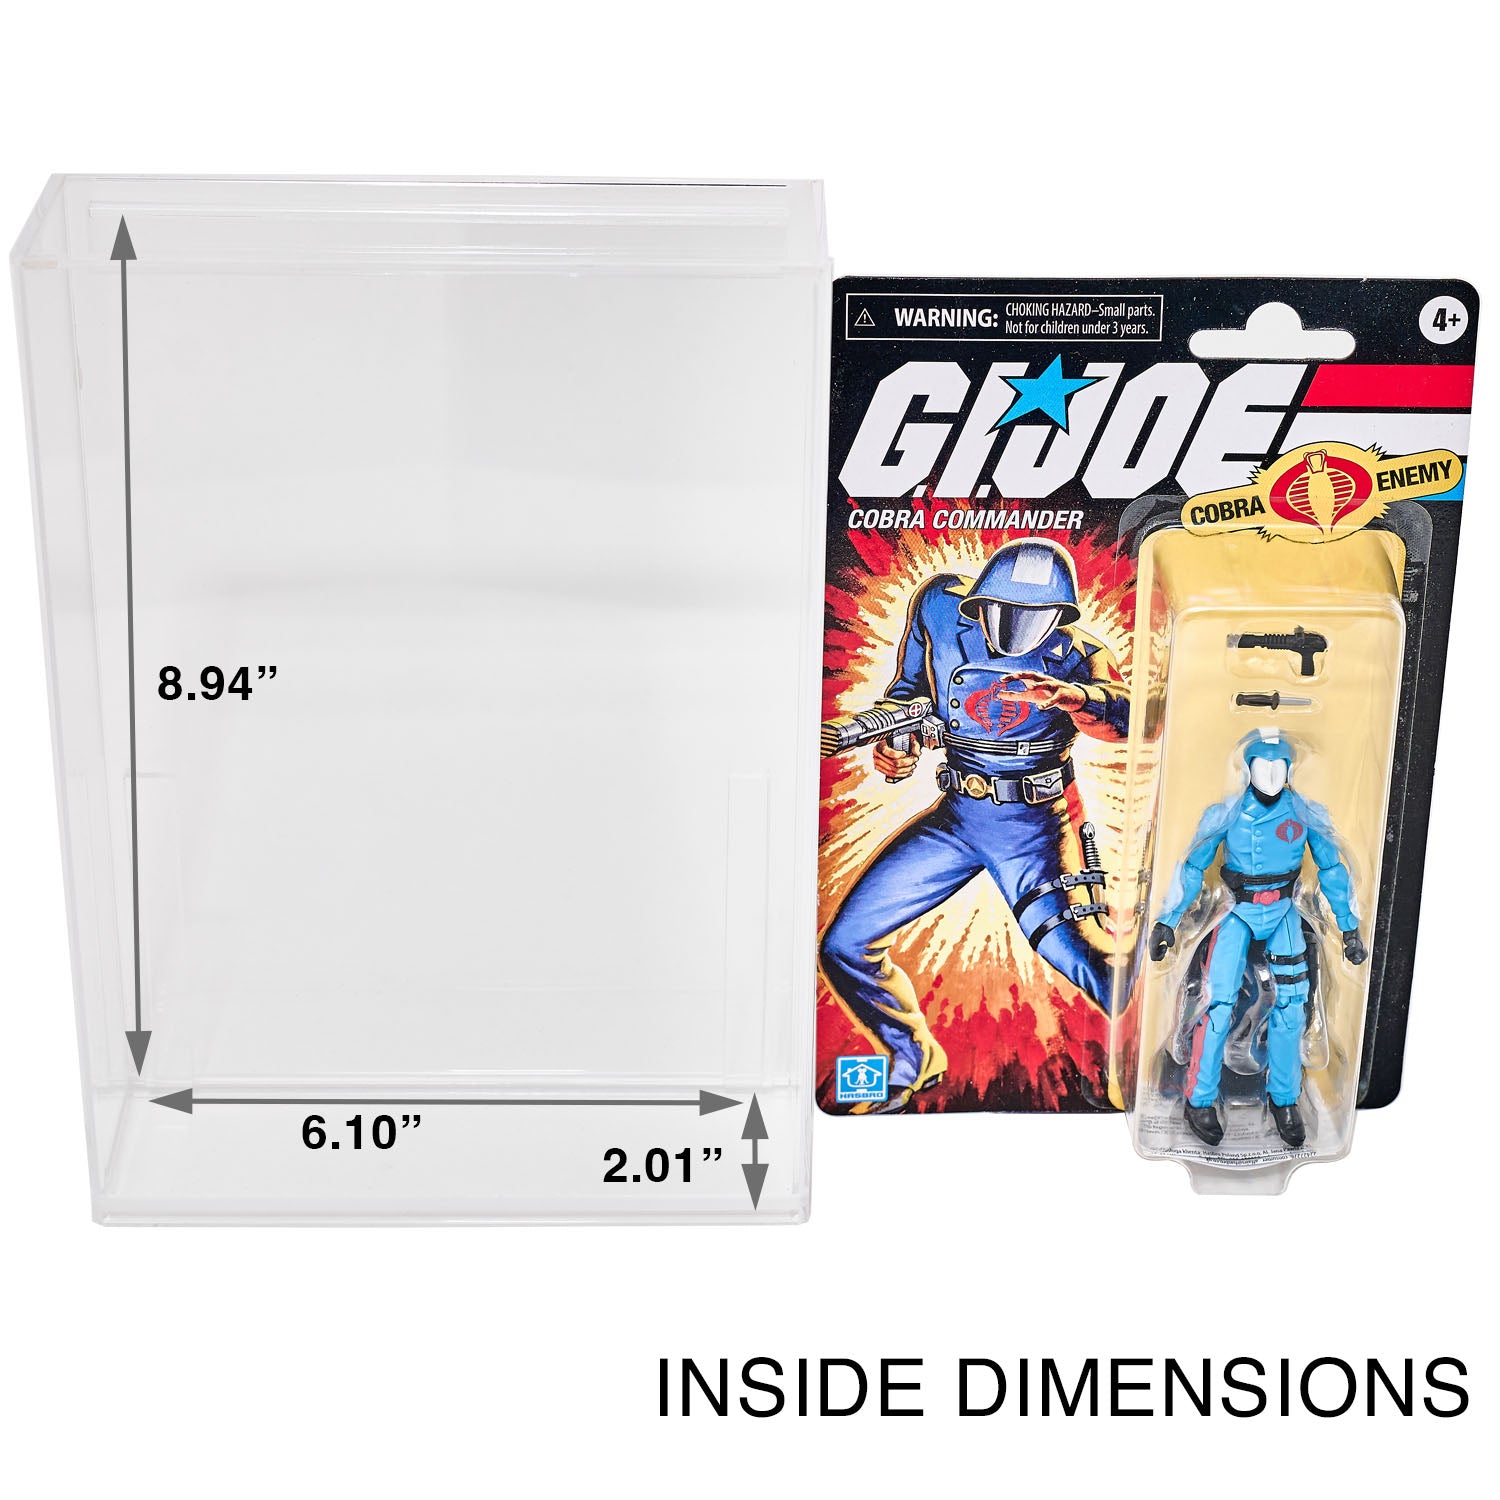 Premium Acrylic Case for Vintage & New Star Wars or GI Joe Carded Figures